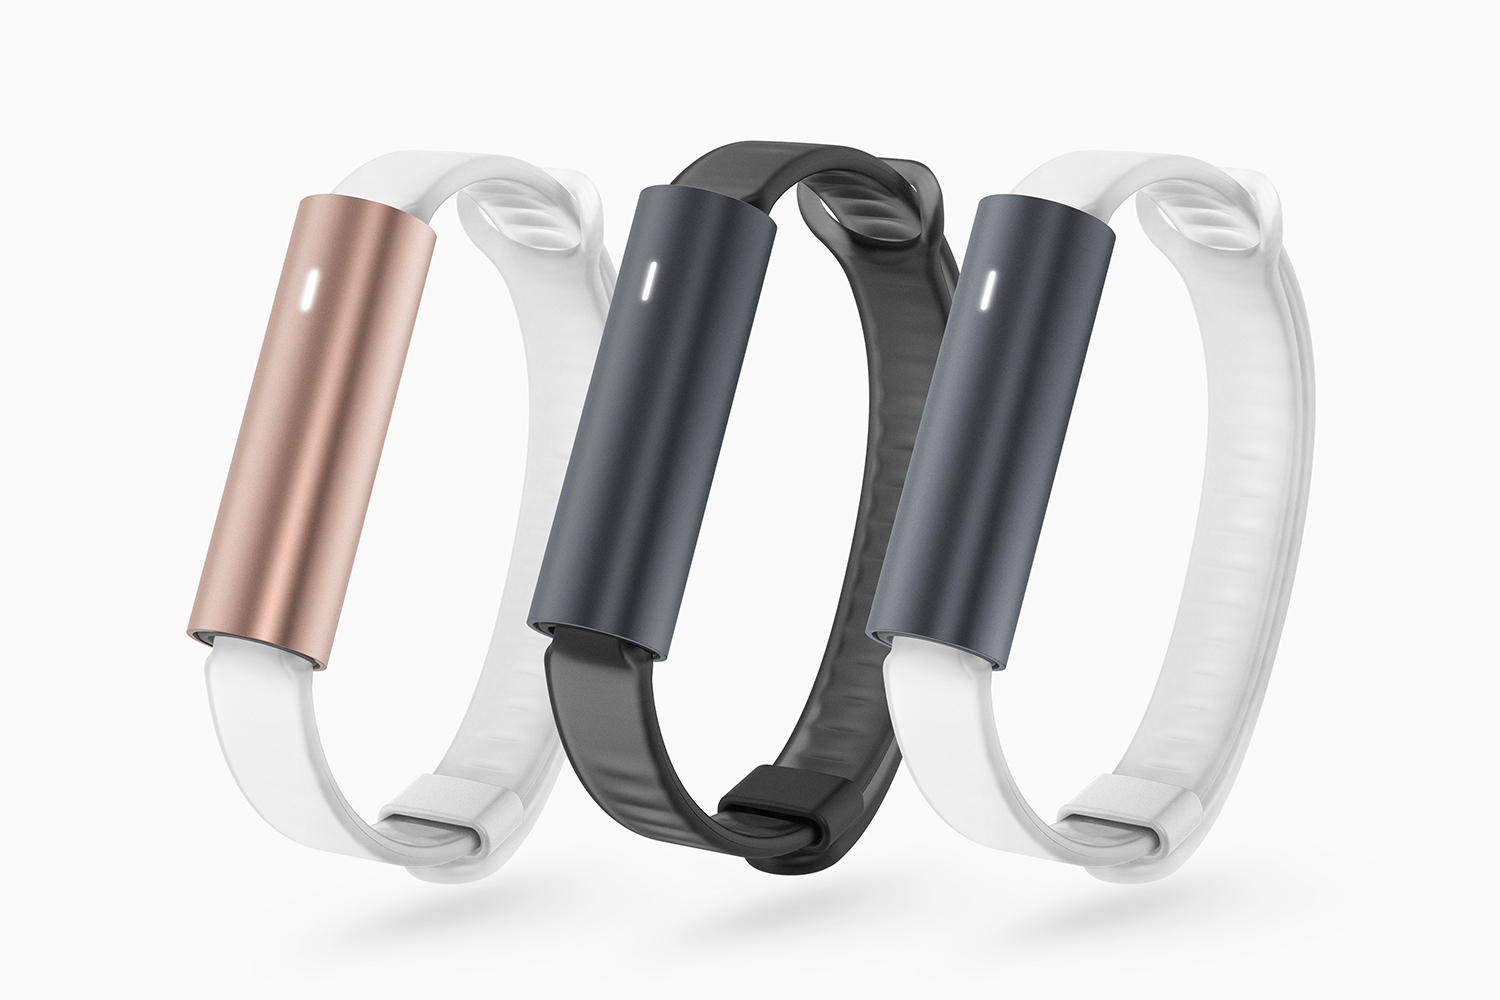 landlord dynamic arithmetic Misfit Shine 2 Gets New Colors and Bands | Digital Trends